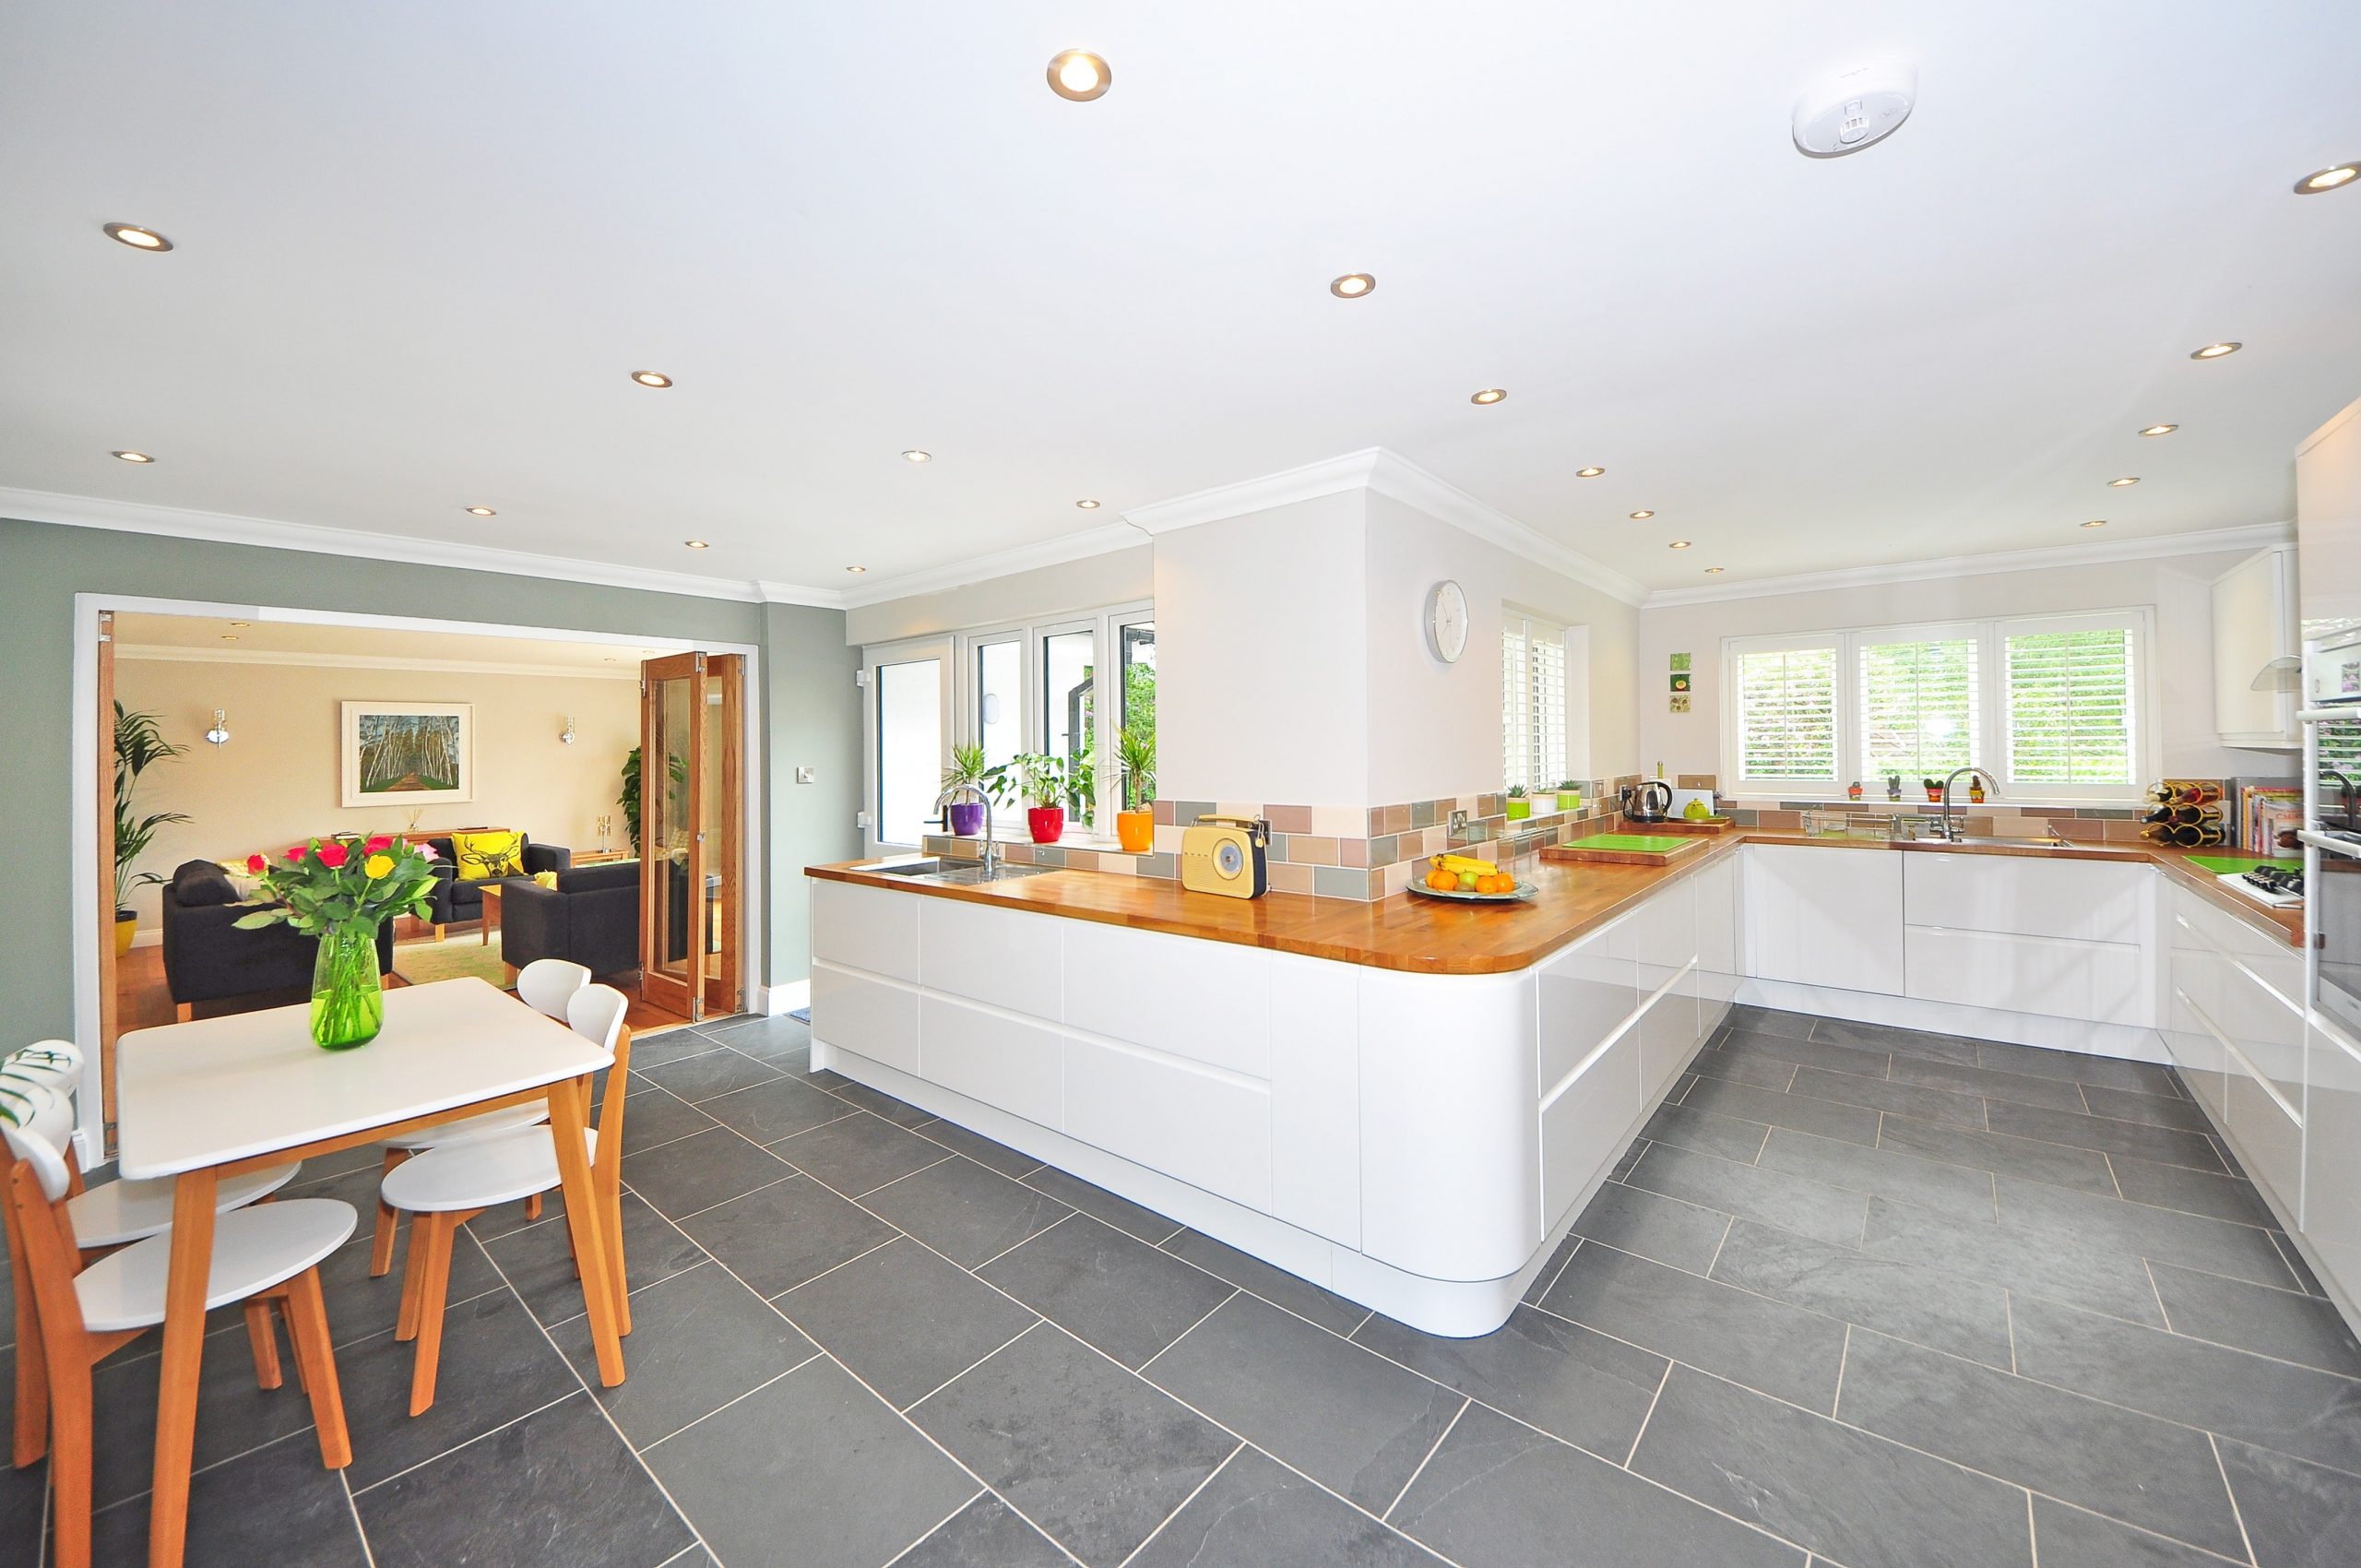 Tiles – the perfect solution for the kitchen?